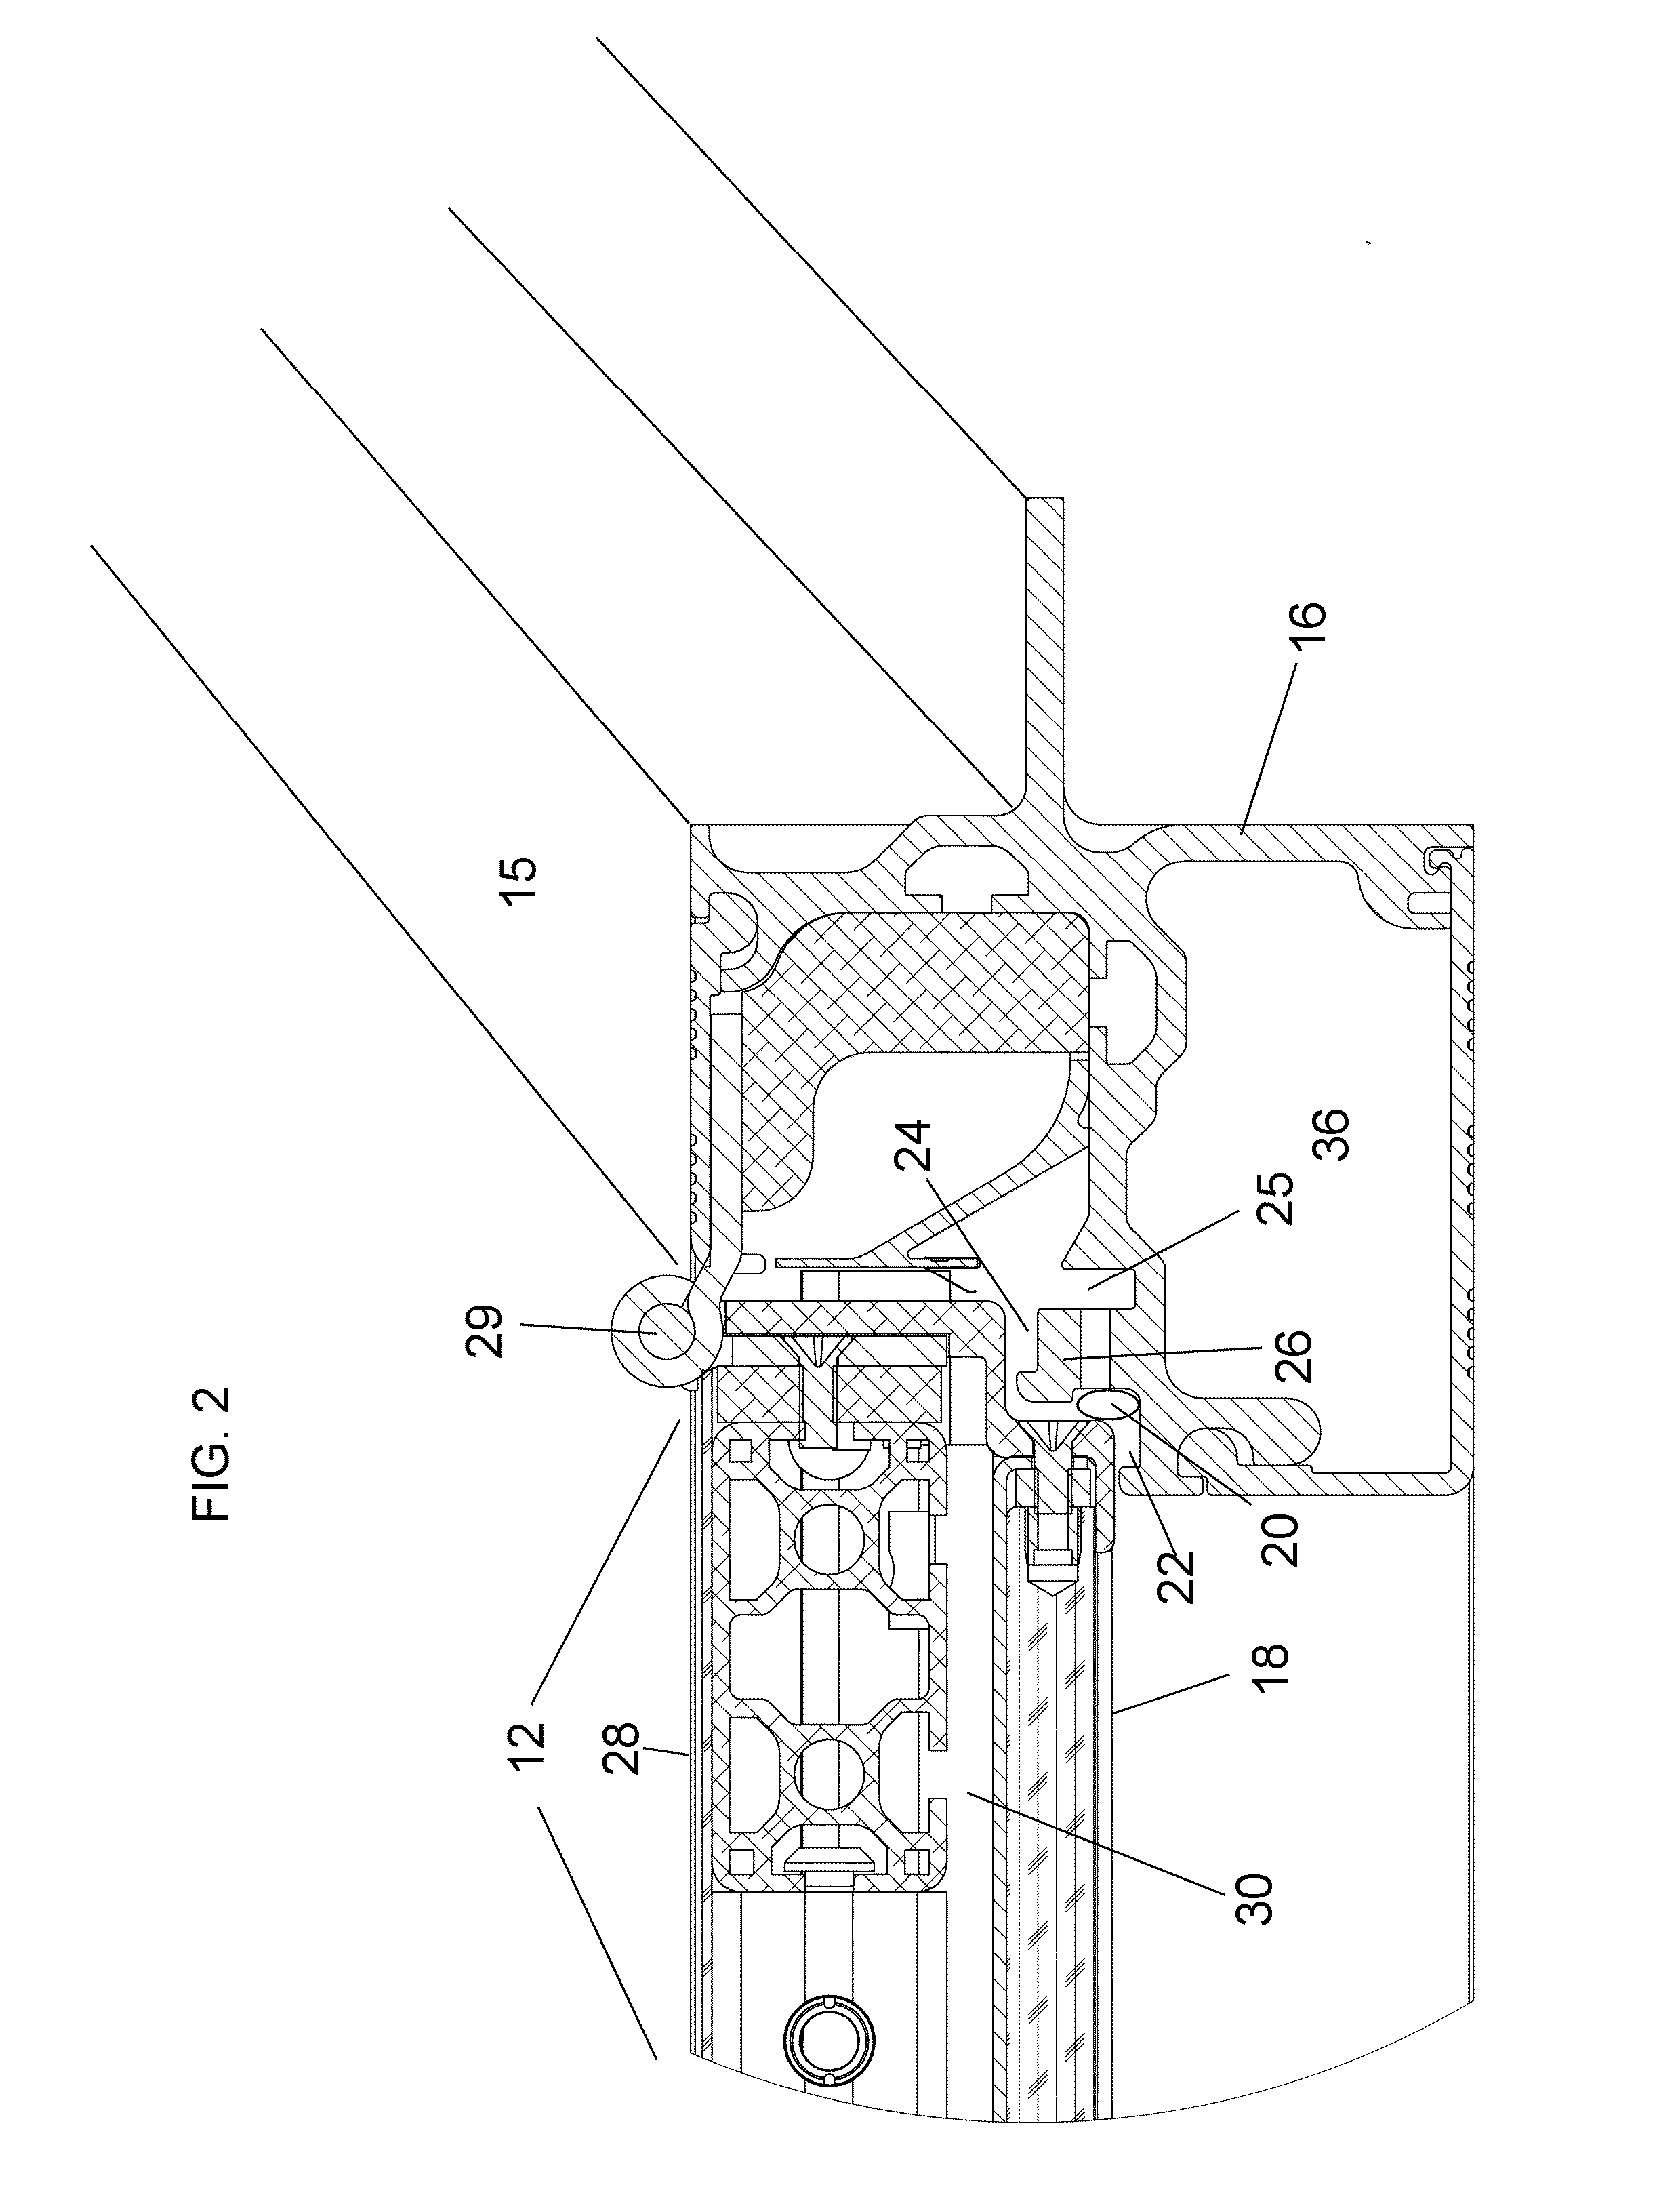 Manual-automatic RF sealing system